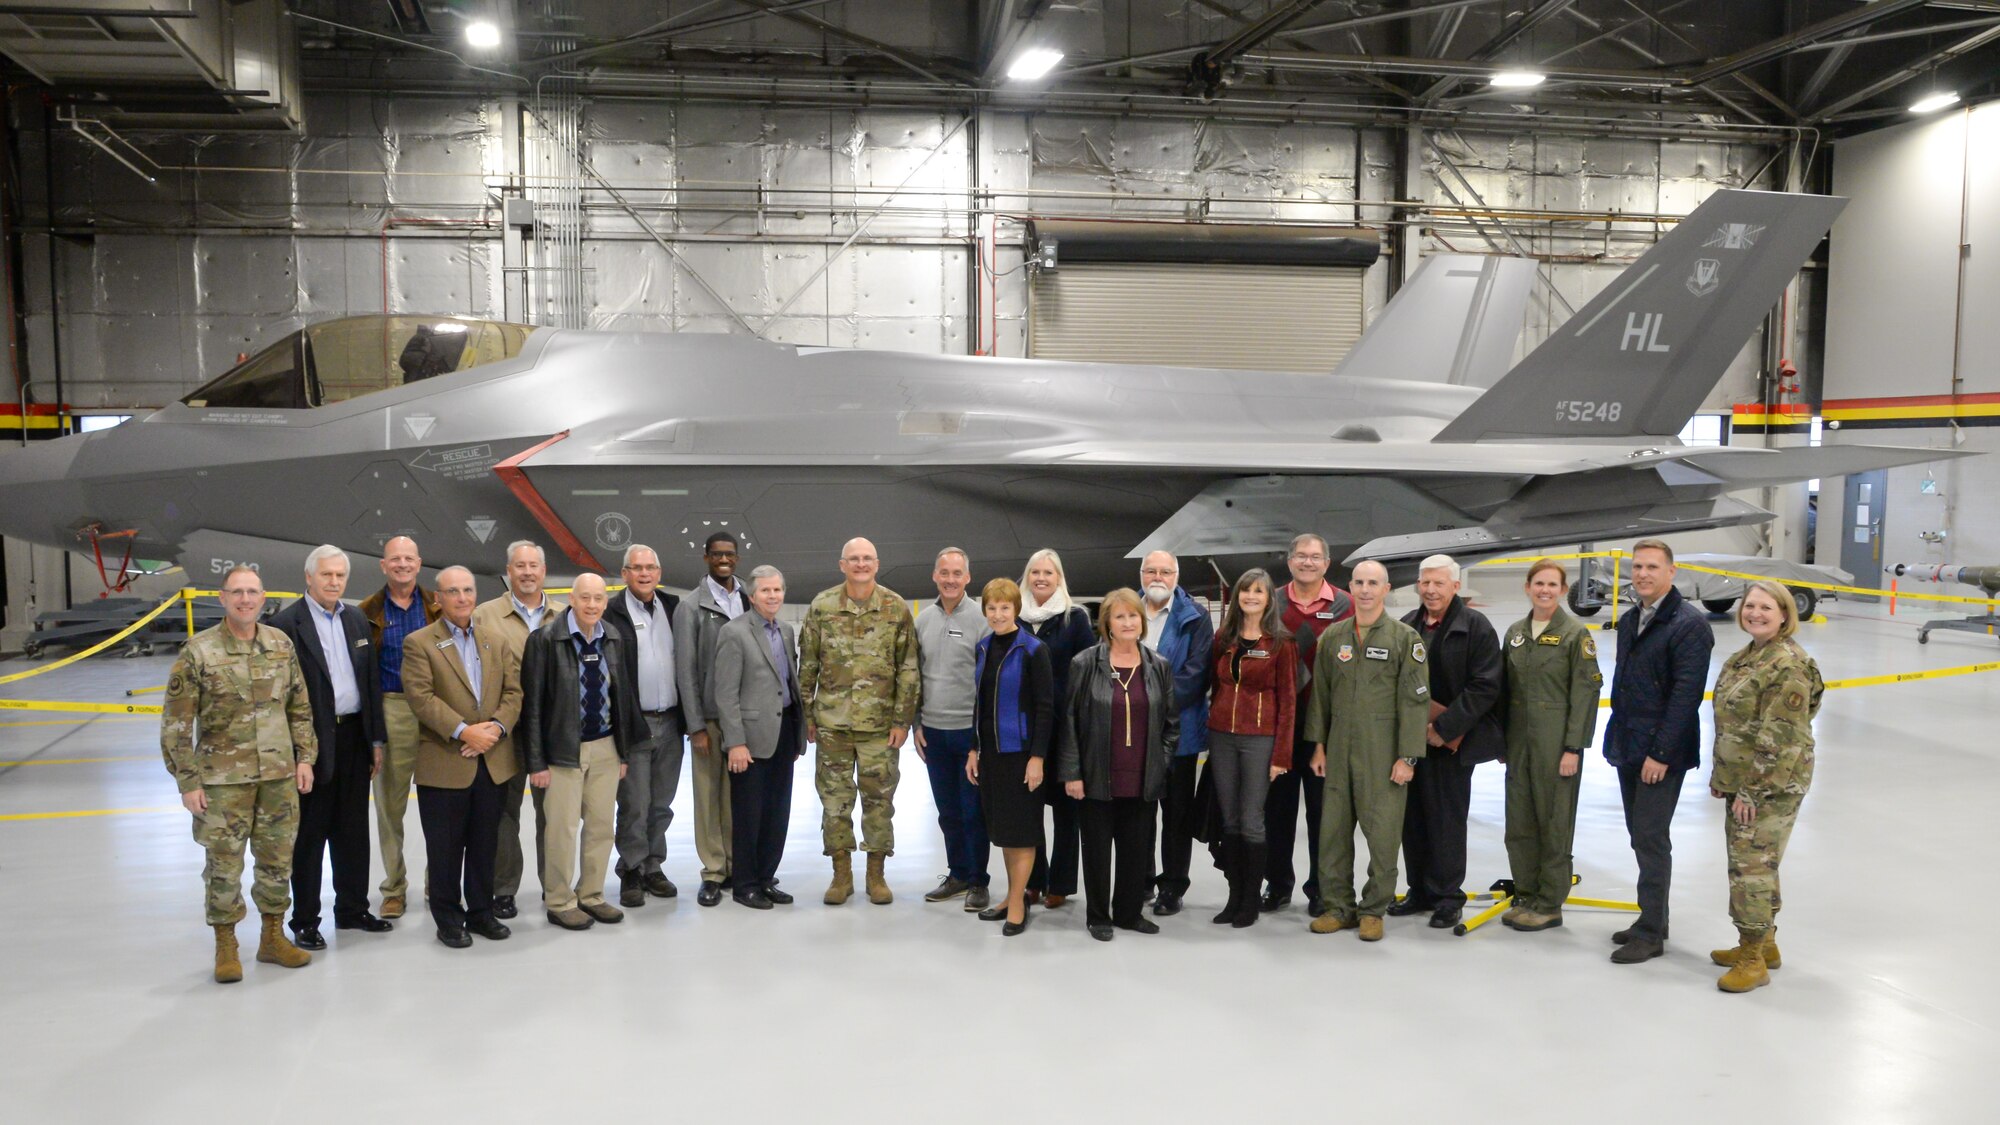 Community leaders from around the country gather for a group photo with Gen. Arnold W. Bunch, Jr., commander for Air Force Material Command, and other Air Force leaders during a base visit Oct. 21, 2019, at Hill Air Force Base, Utah. The community leaders are members of the command's Civic Leader Program, and meet twice annually to hear updates on AFMC and Air Force issues. (U.S. Air Force photo by Cynthia Griggs)